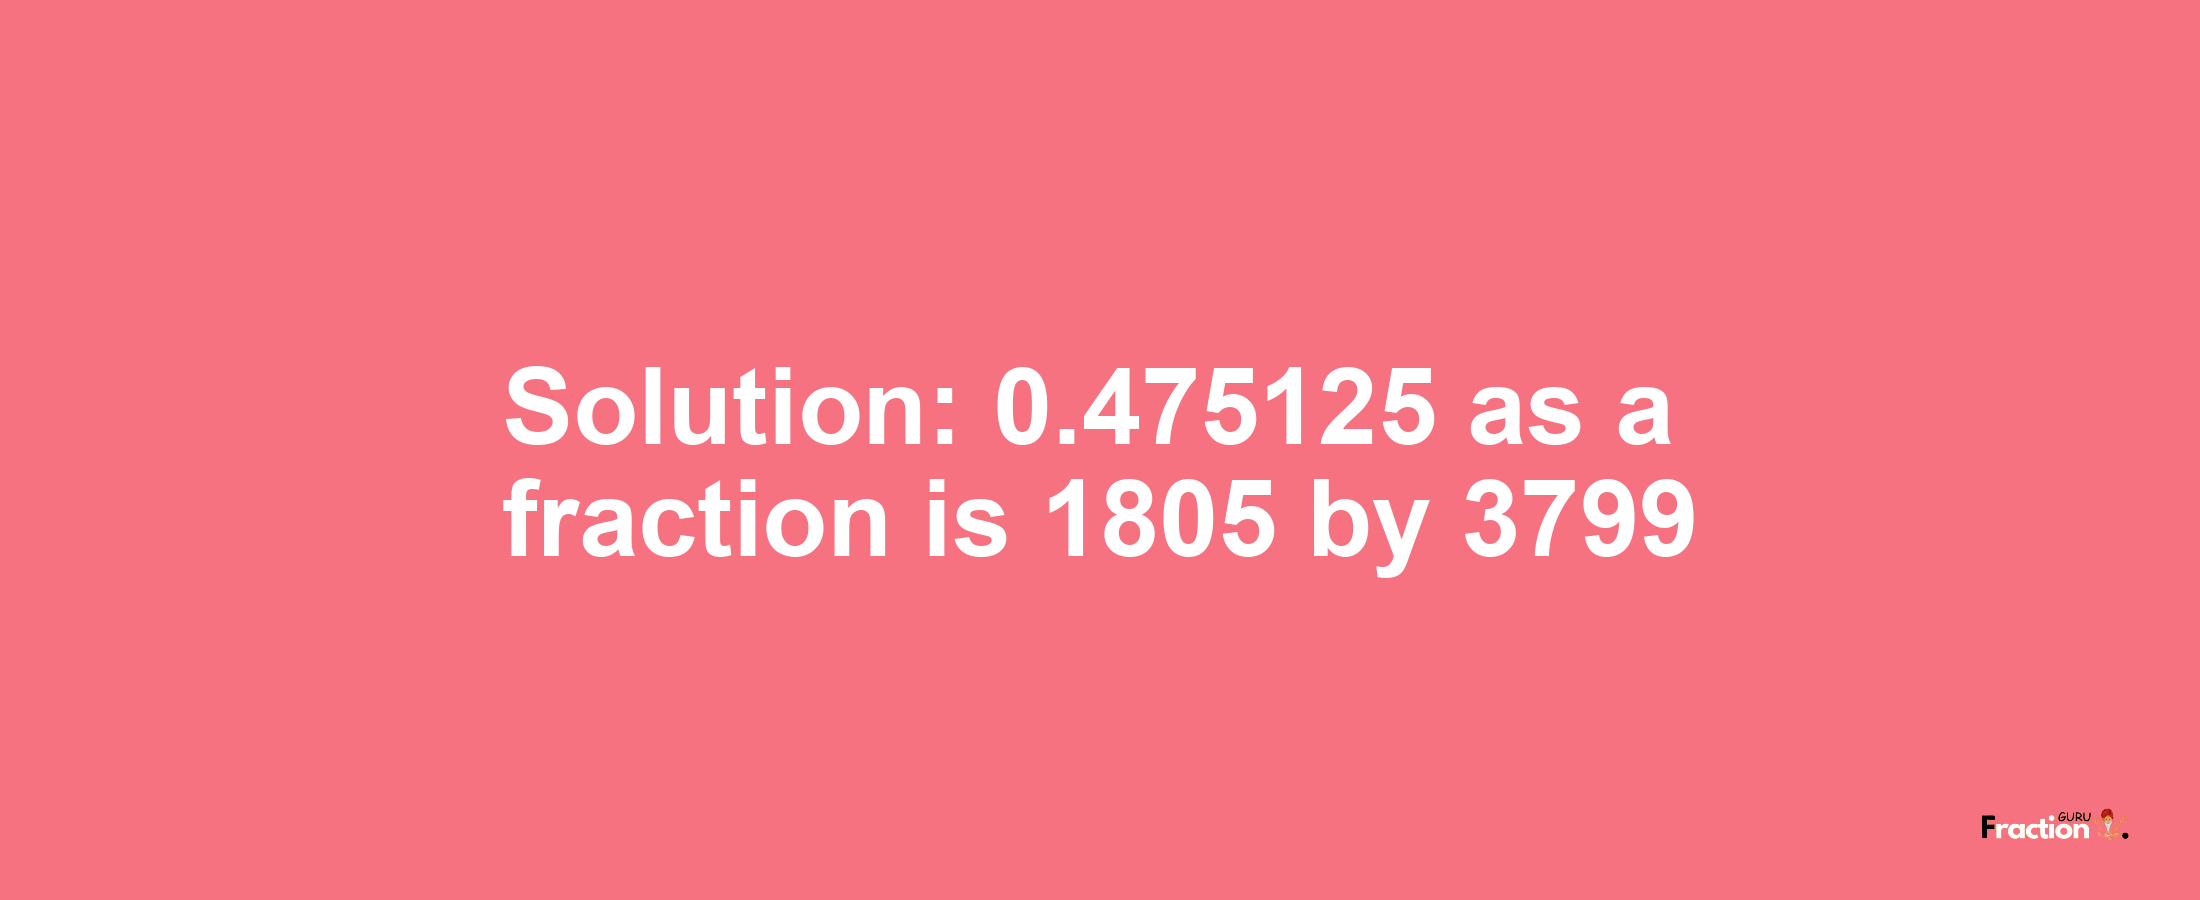 Solution:0.475125 as a fraction is 1805/3799